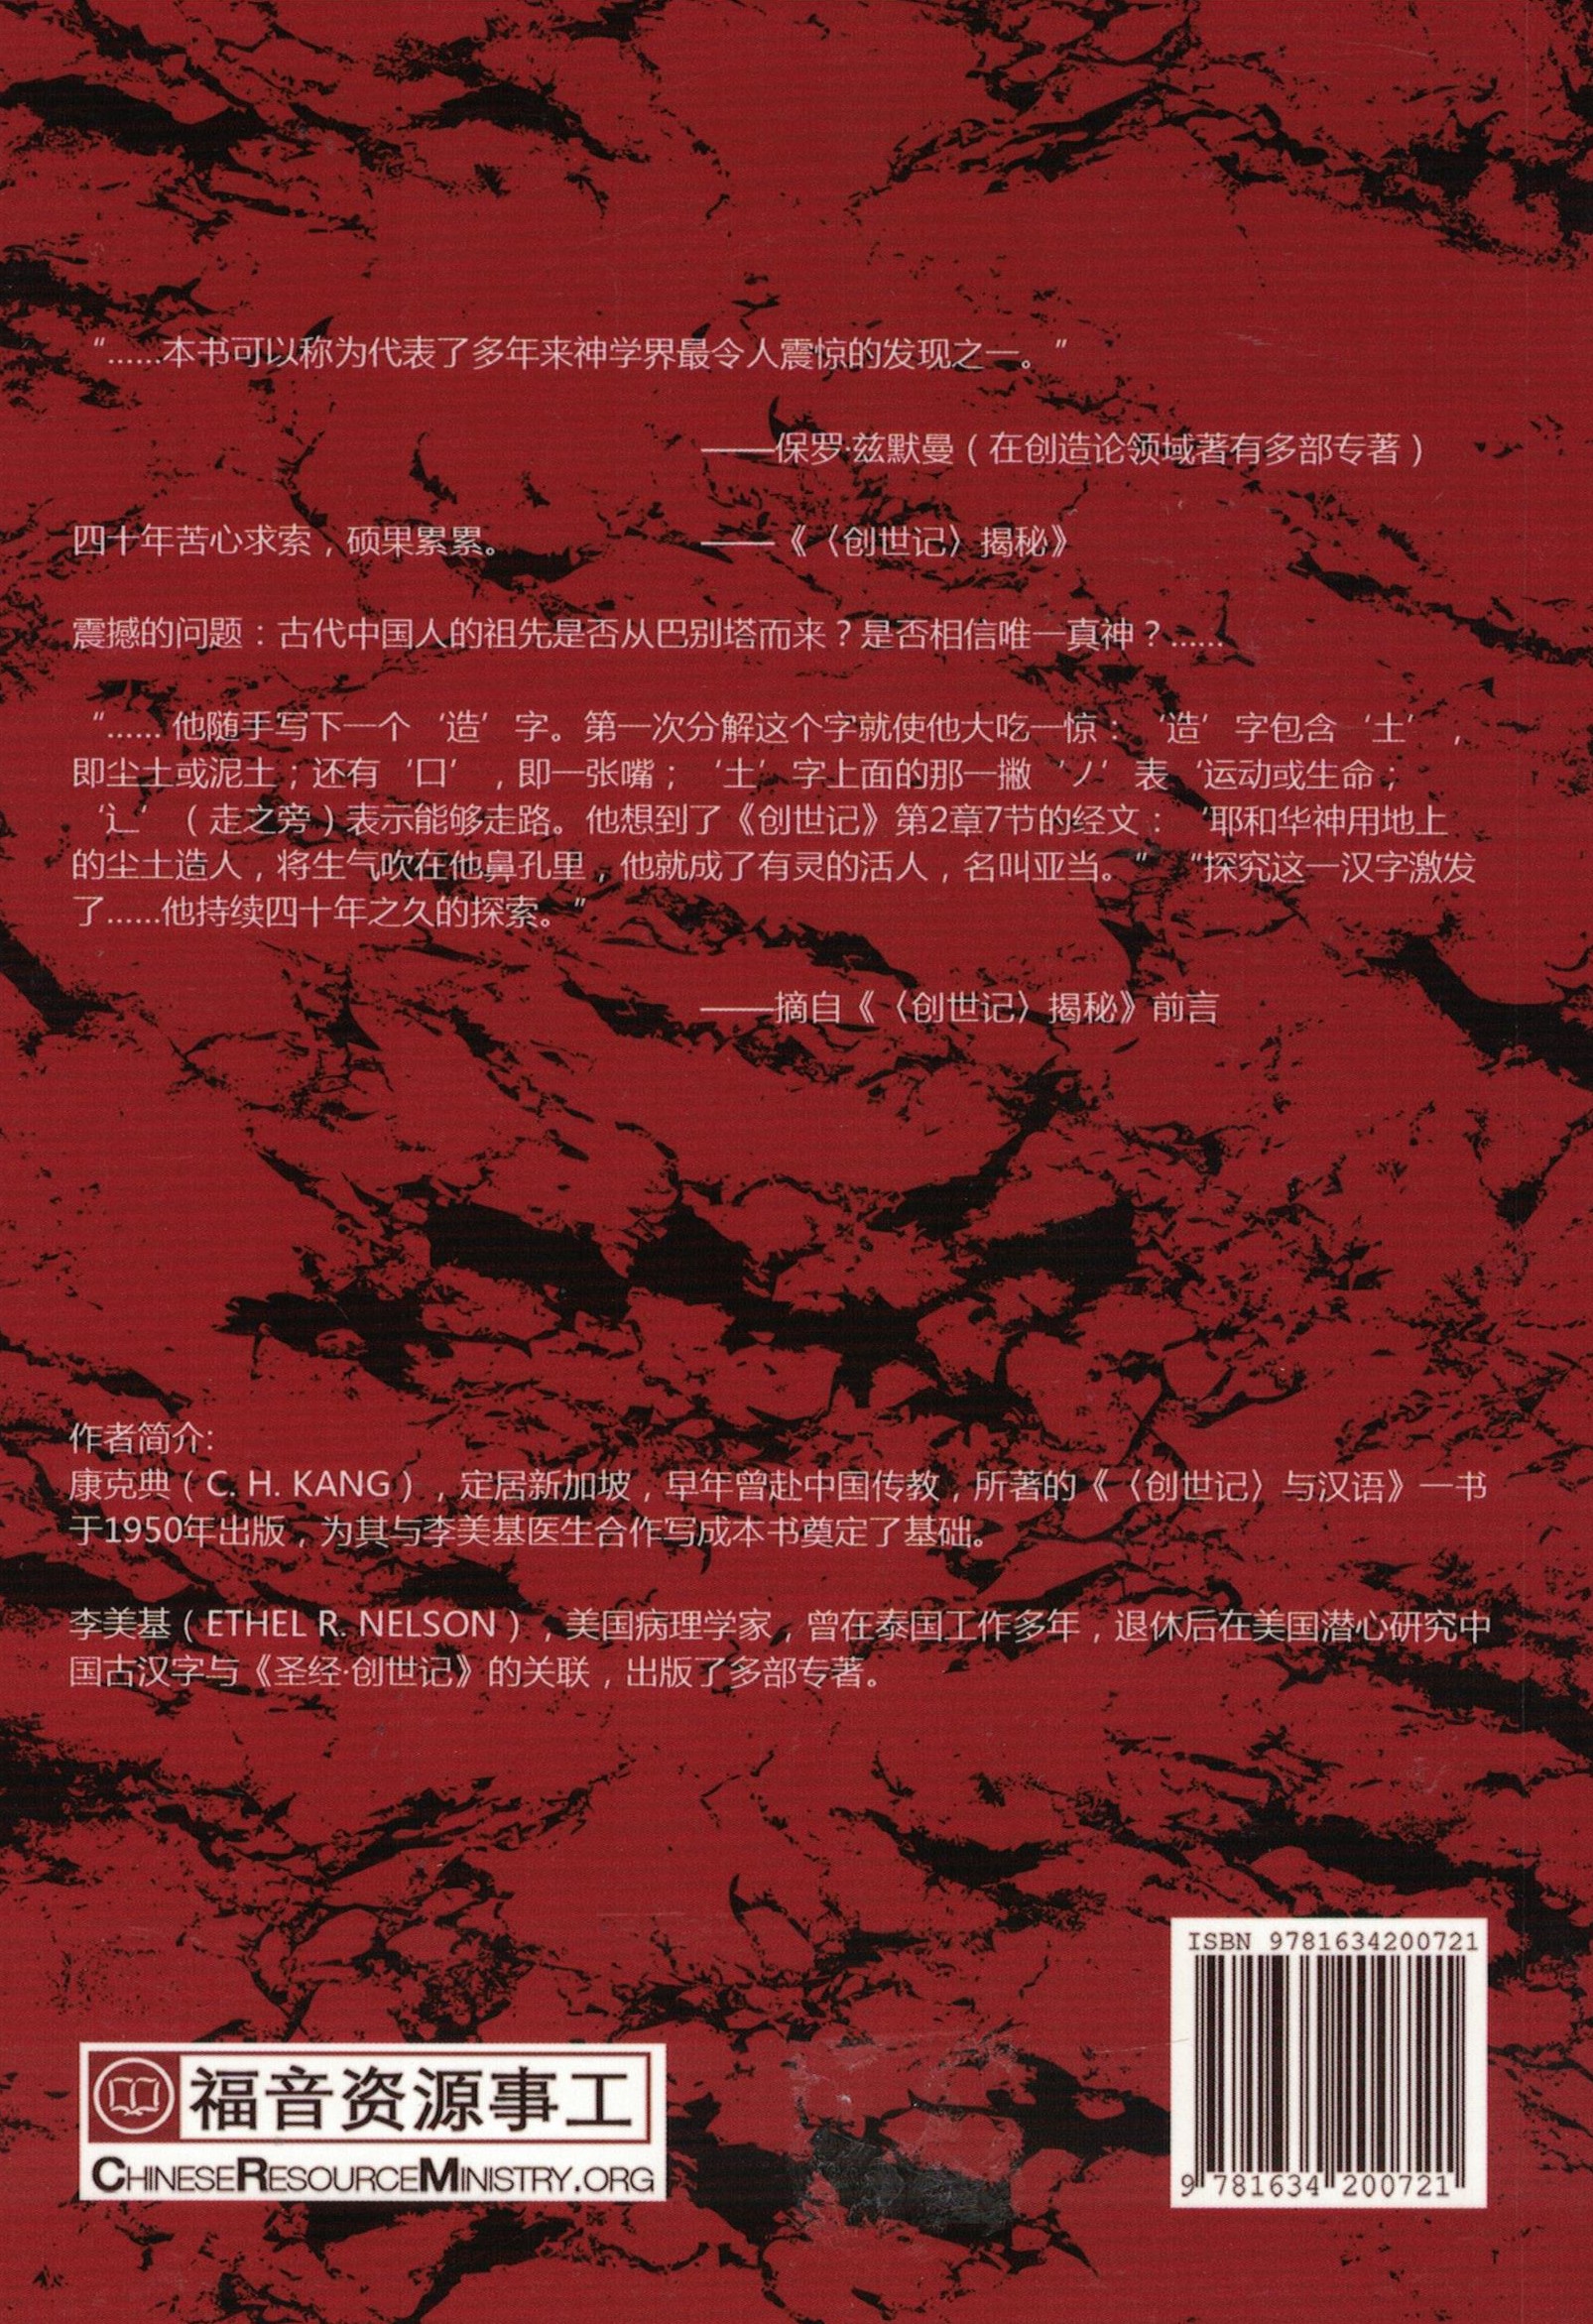 C7-1 back cover